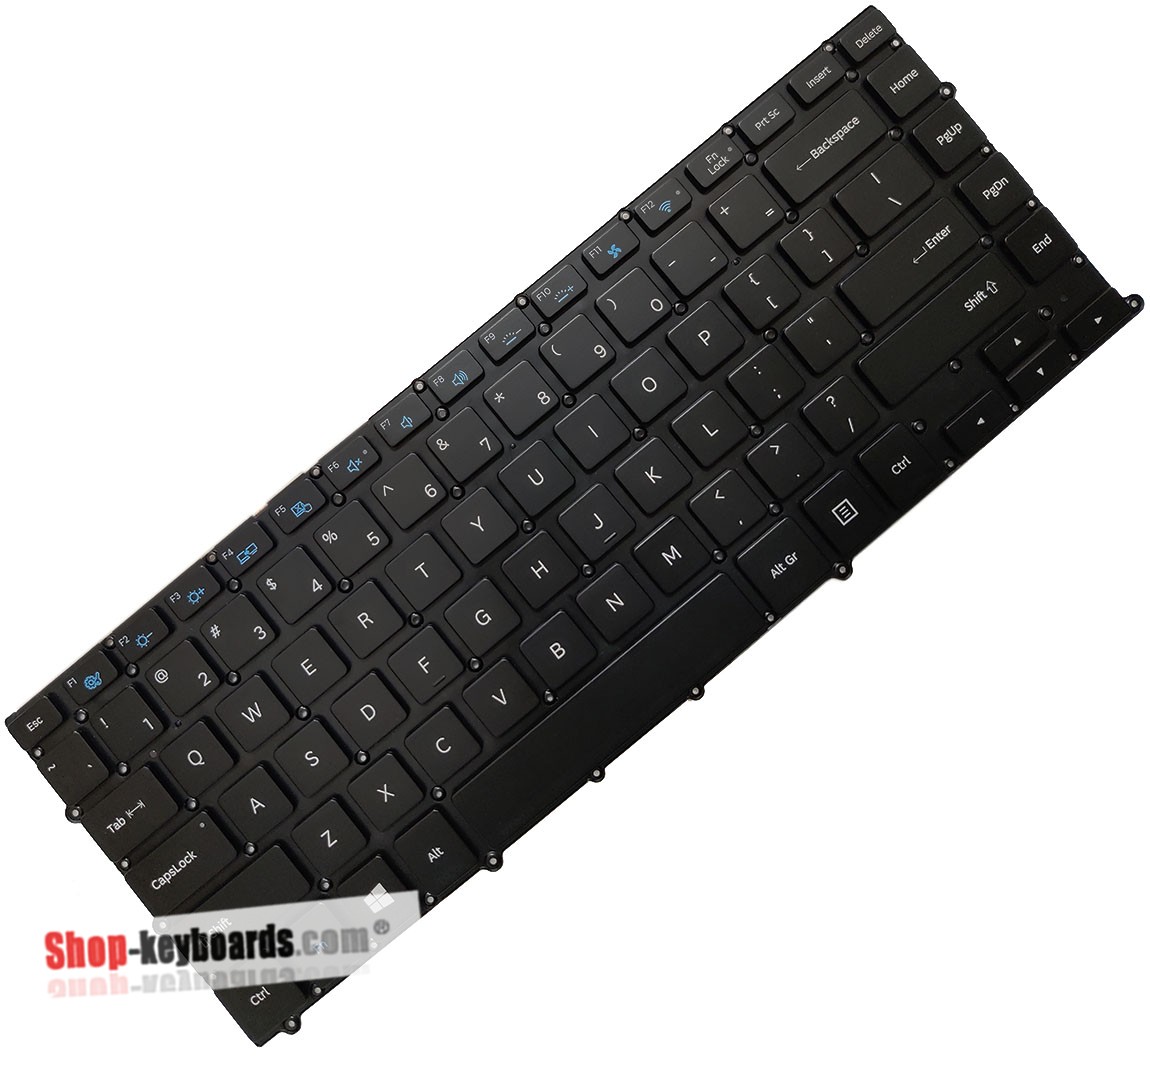 Samsung NP900X4E-A01US Keyboard replacement